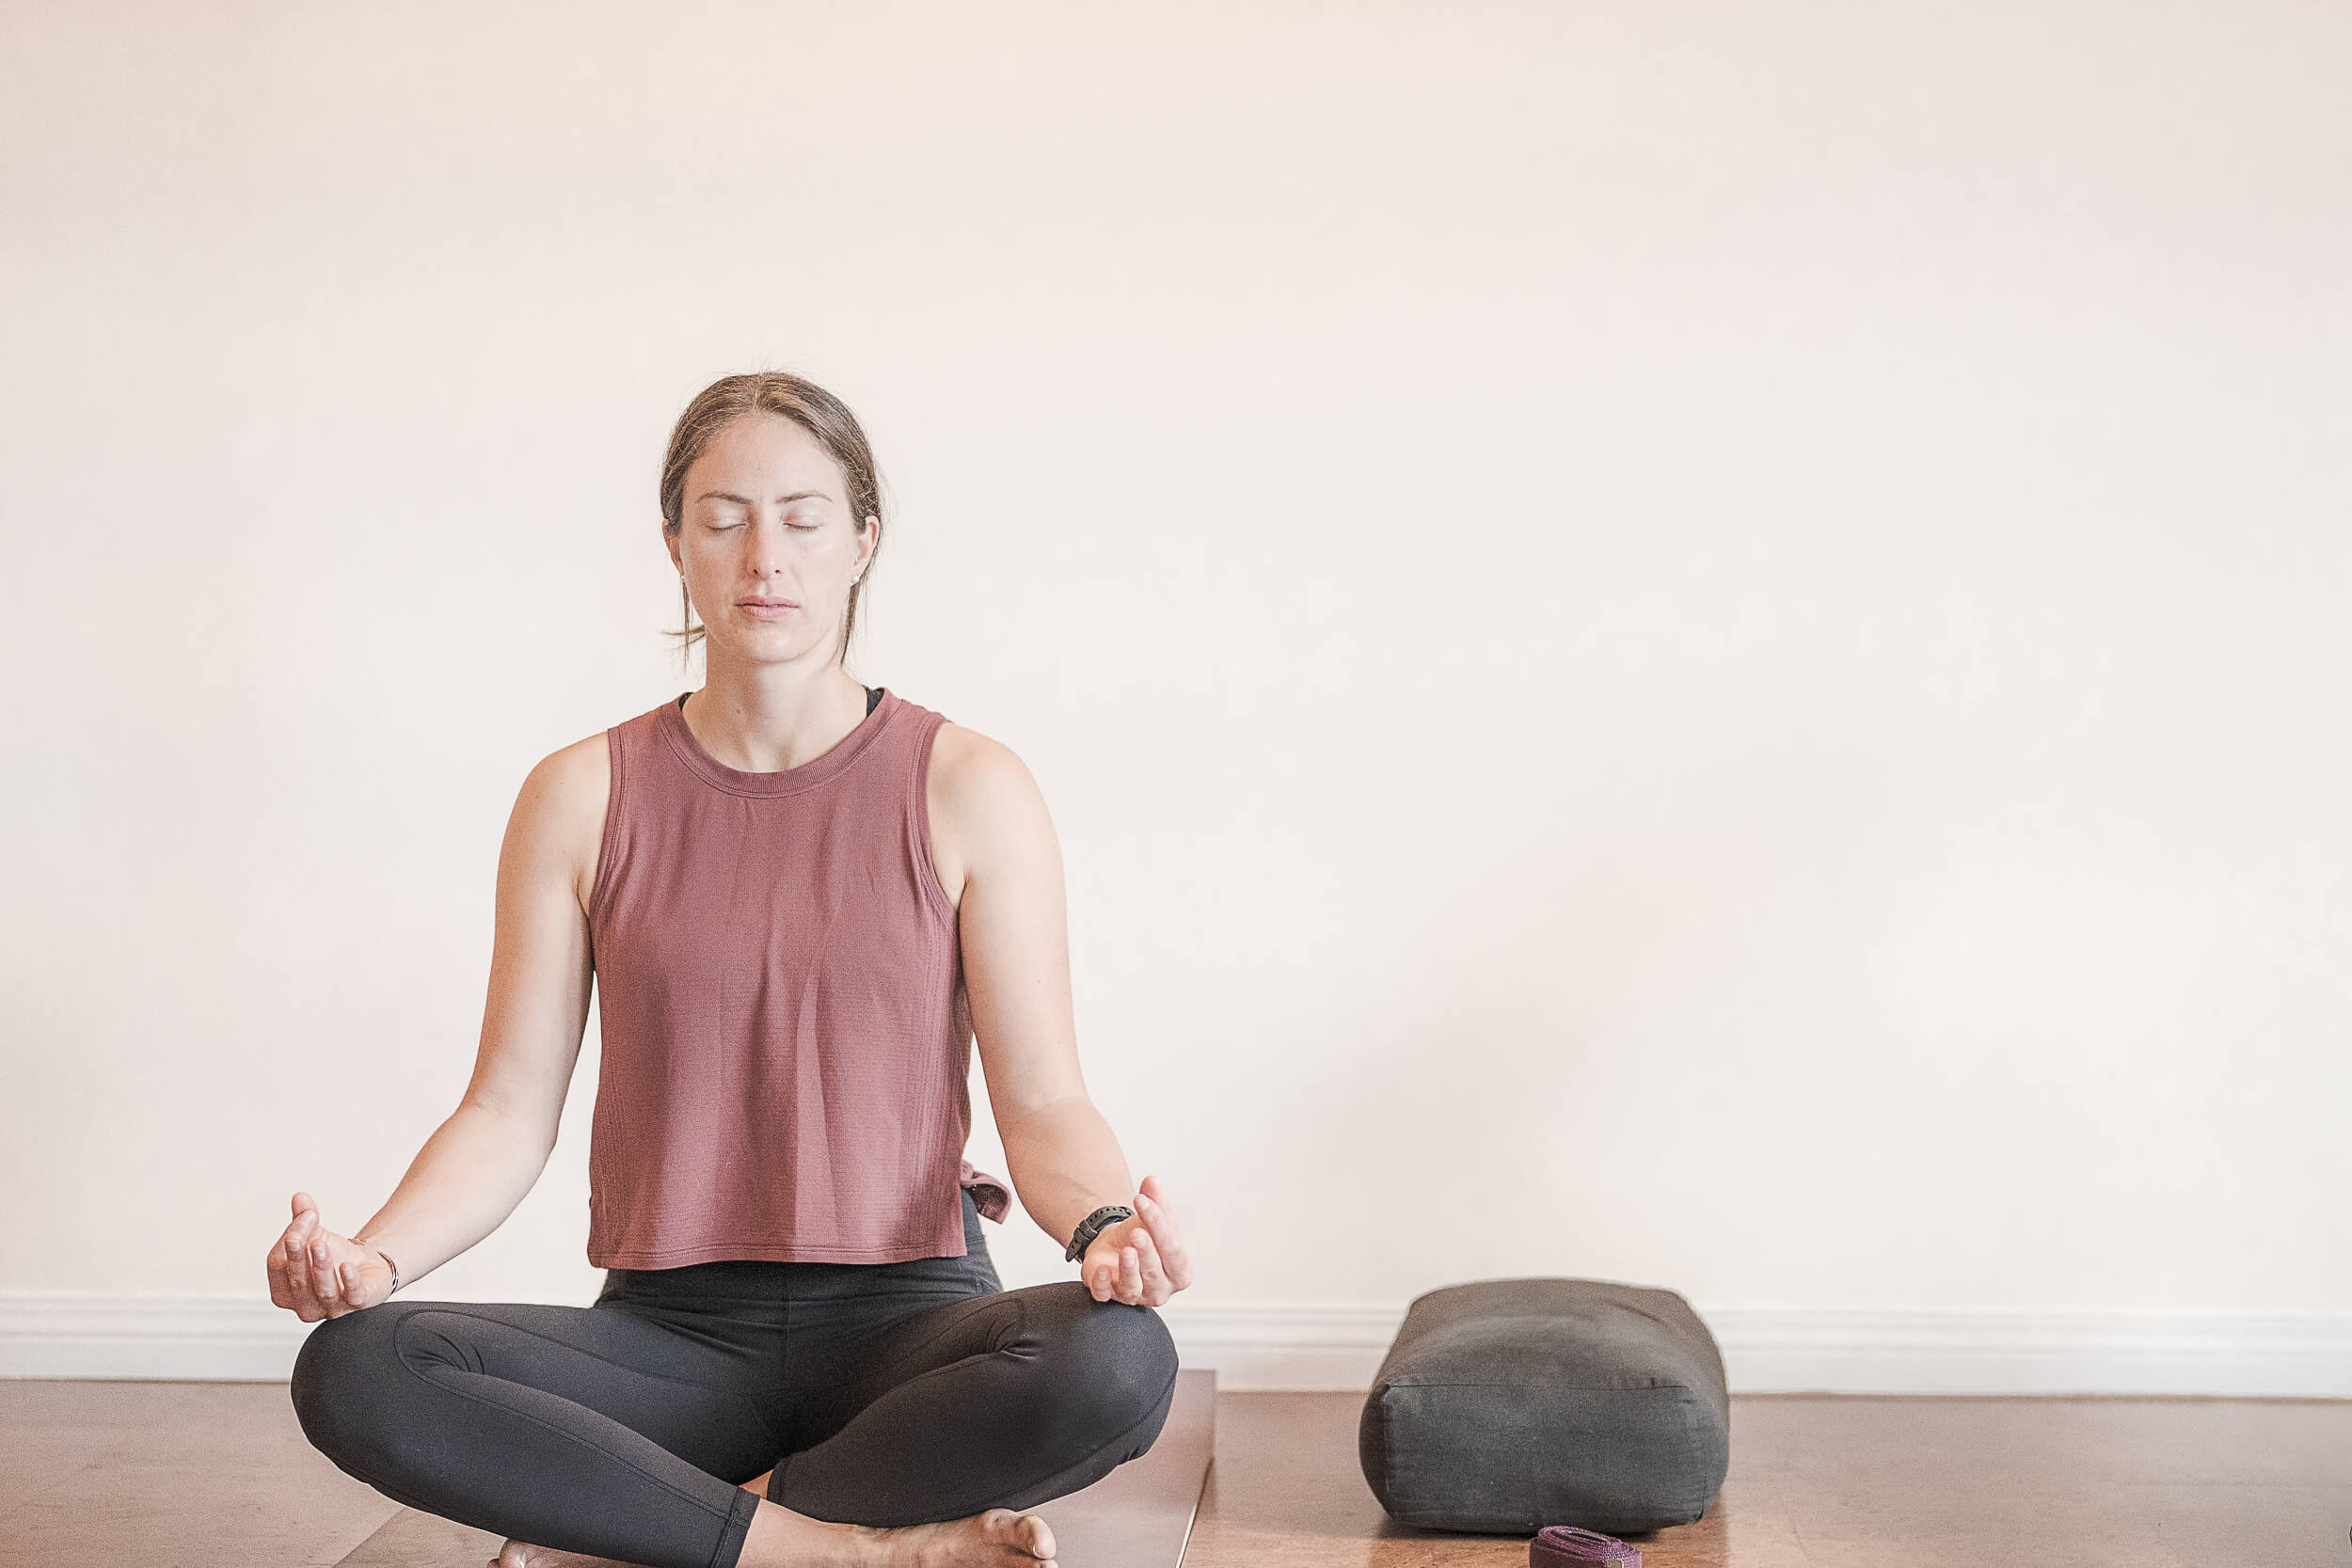 A tranquil yoga student meditates in a seated position on a mat, with eyes closed and hands resting on knees in a mudra, conveying a sense of peace and mindfulness at Shala Yoga studio in Squamish